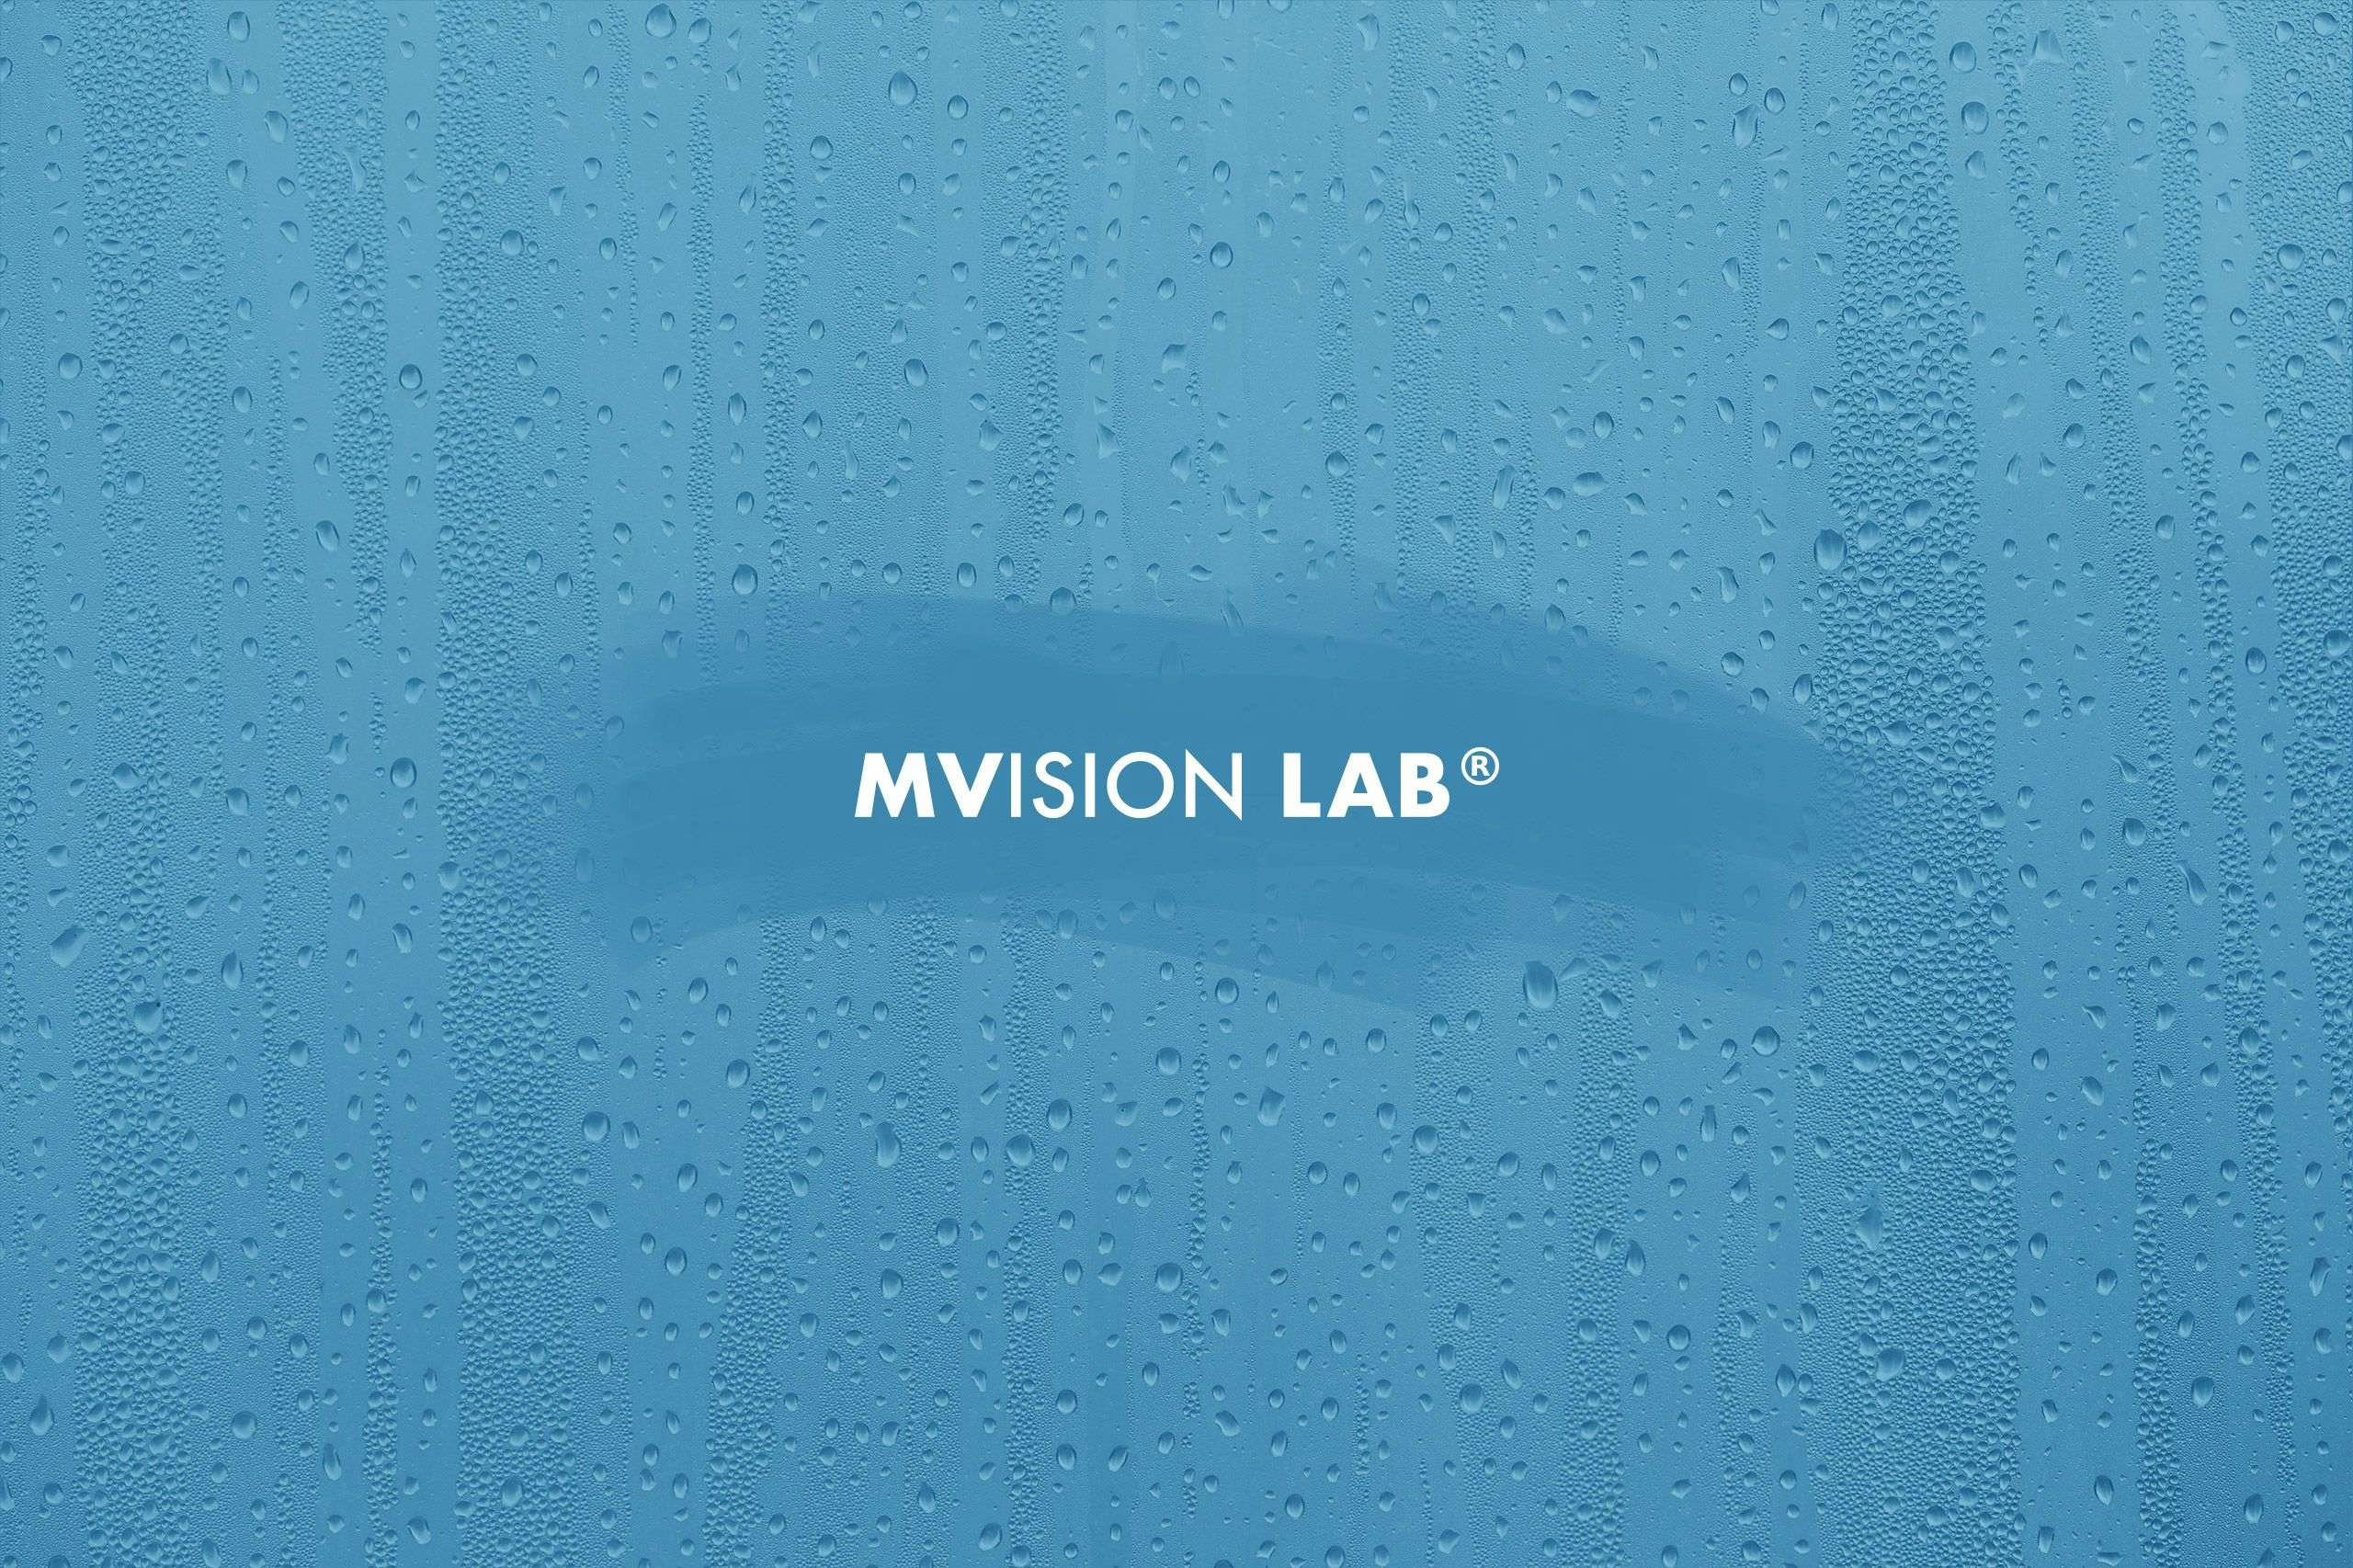 MVision Lab project hero image hinting at their innovative anti-fog products 